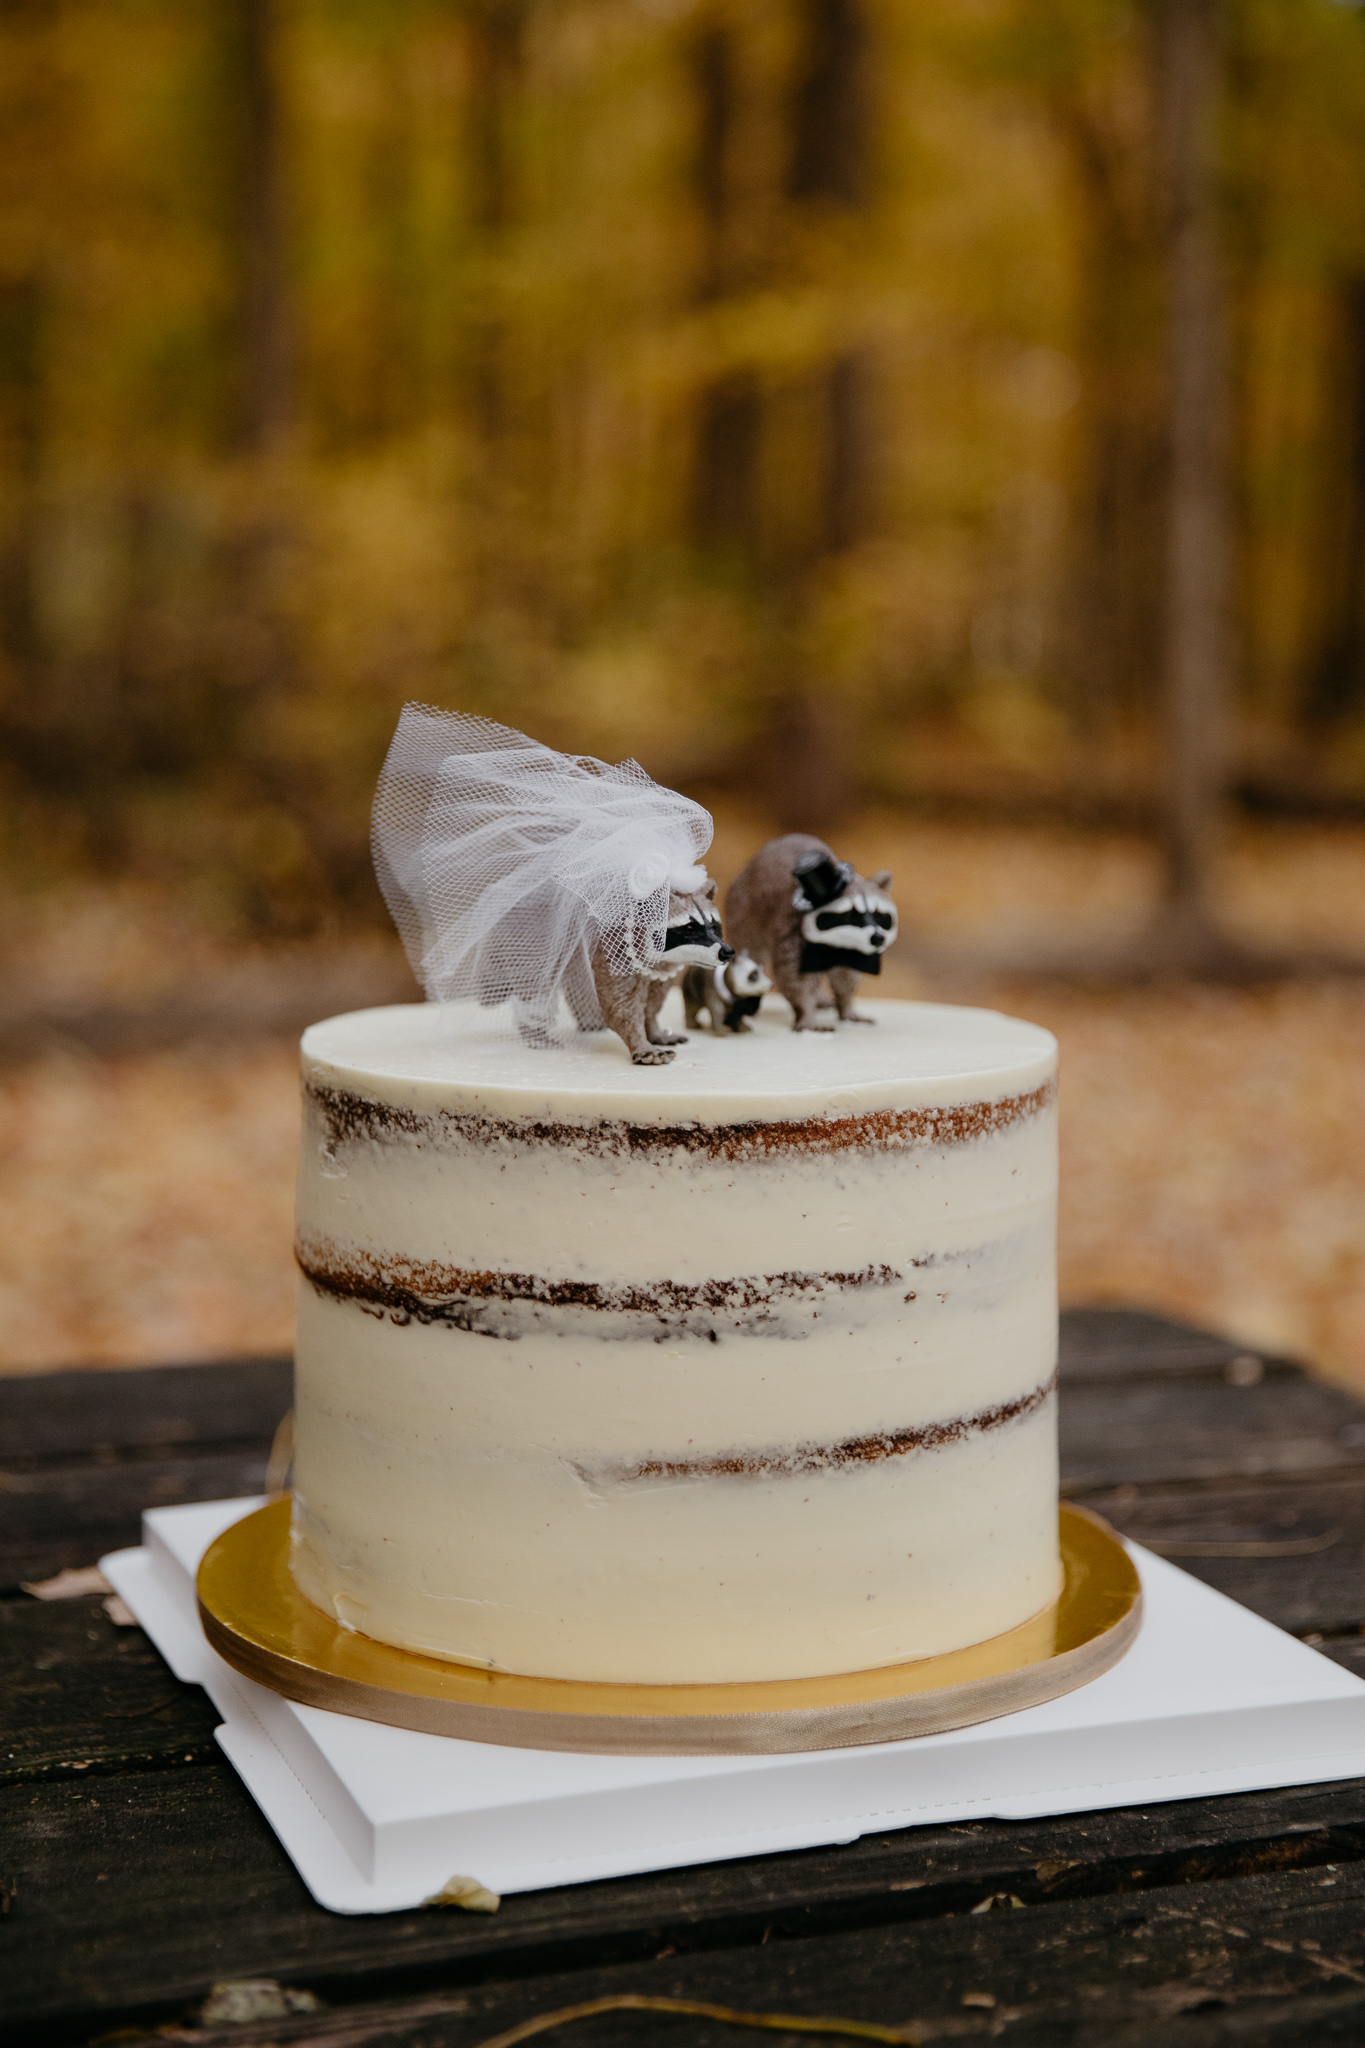 Racoon cake toppers on wedding cake at campsite during a fall elopement